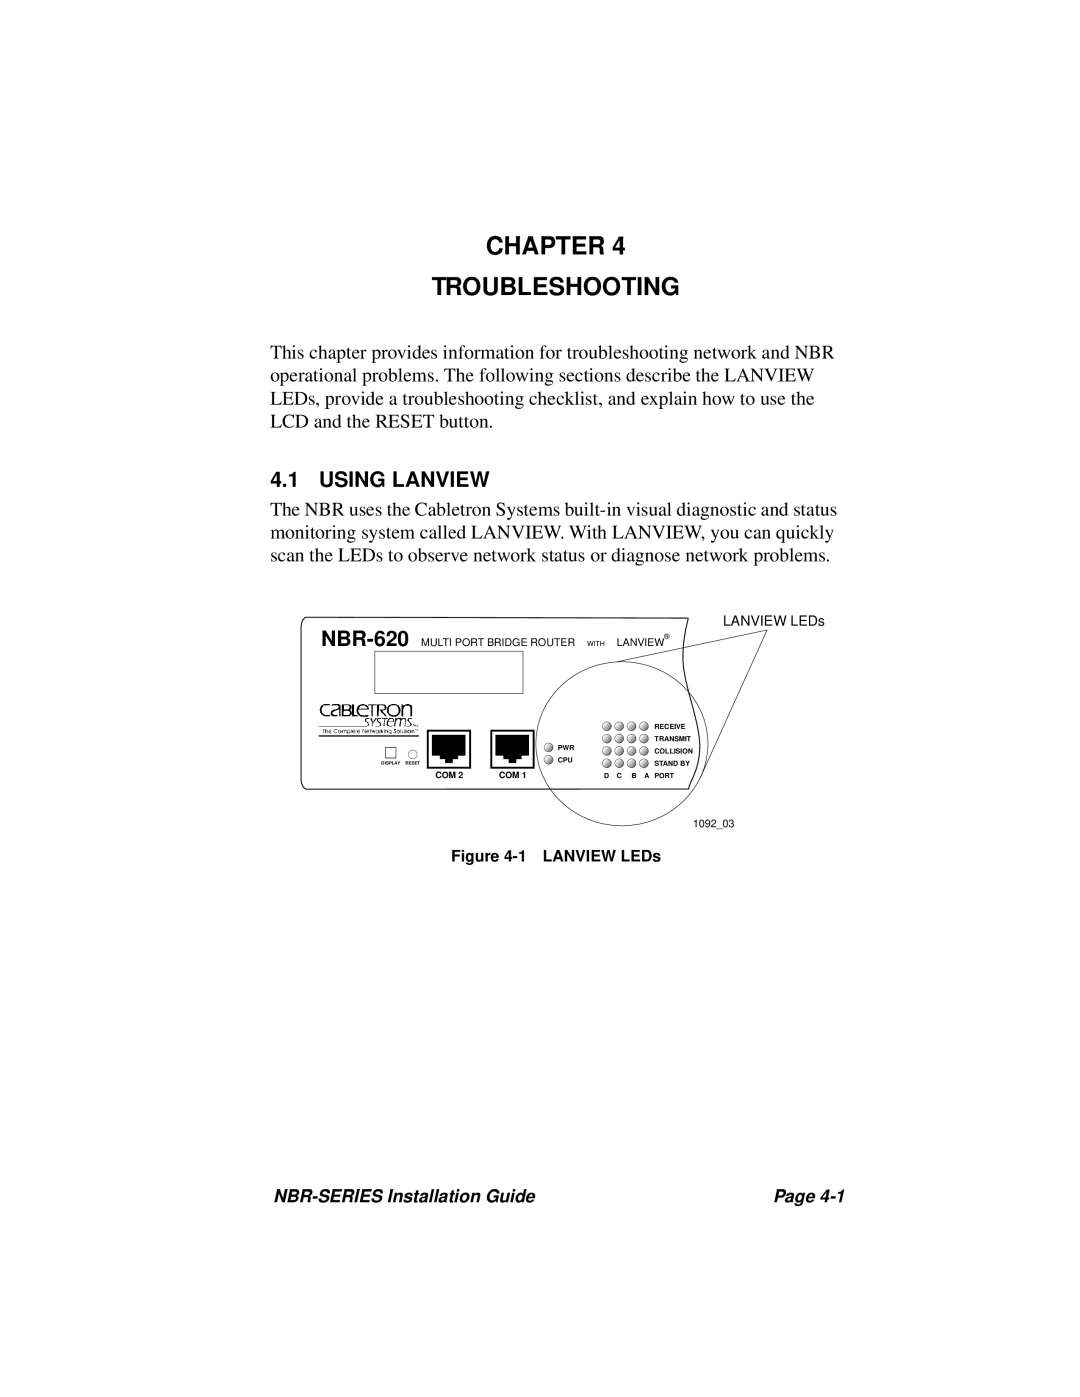 Cabletron Systems NBR-420, NBR-220, NBR-620 manual Chapter Troubleshooting, Using Lanview 